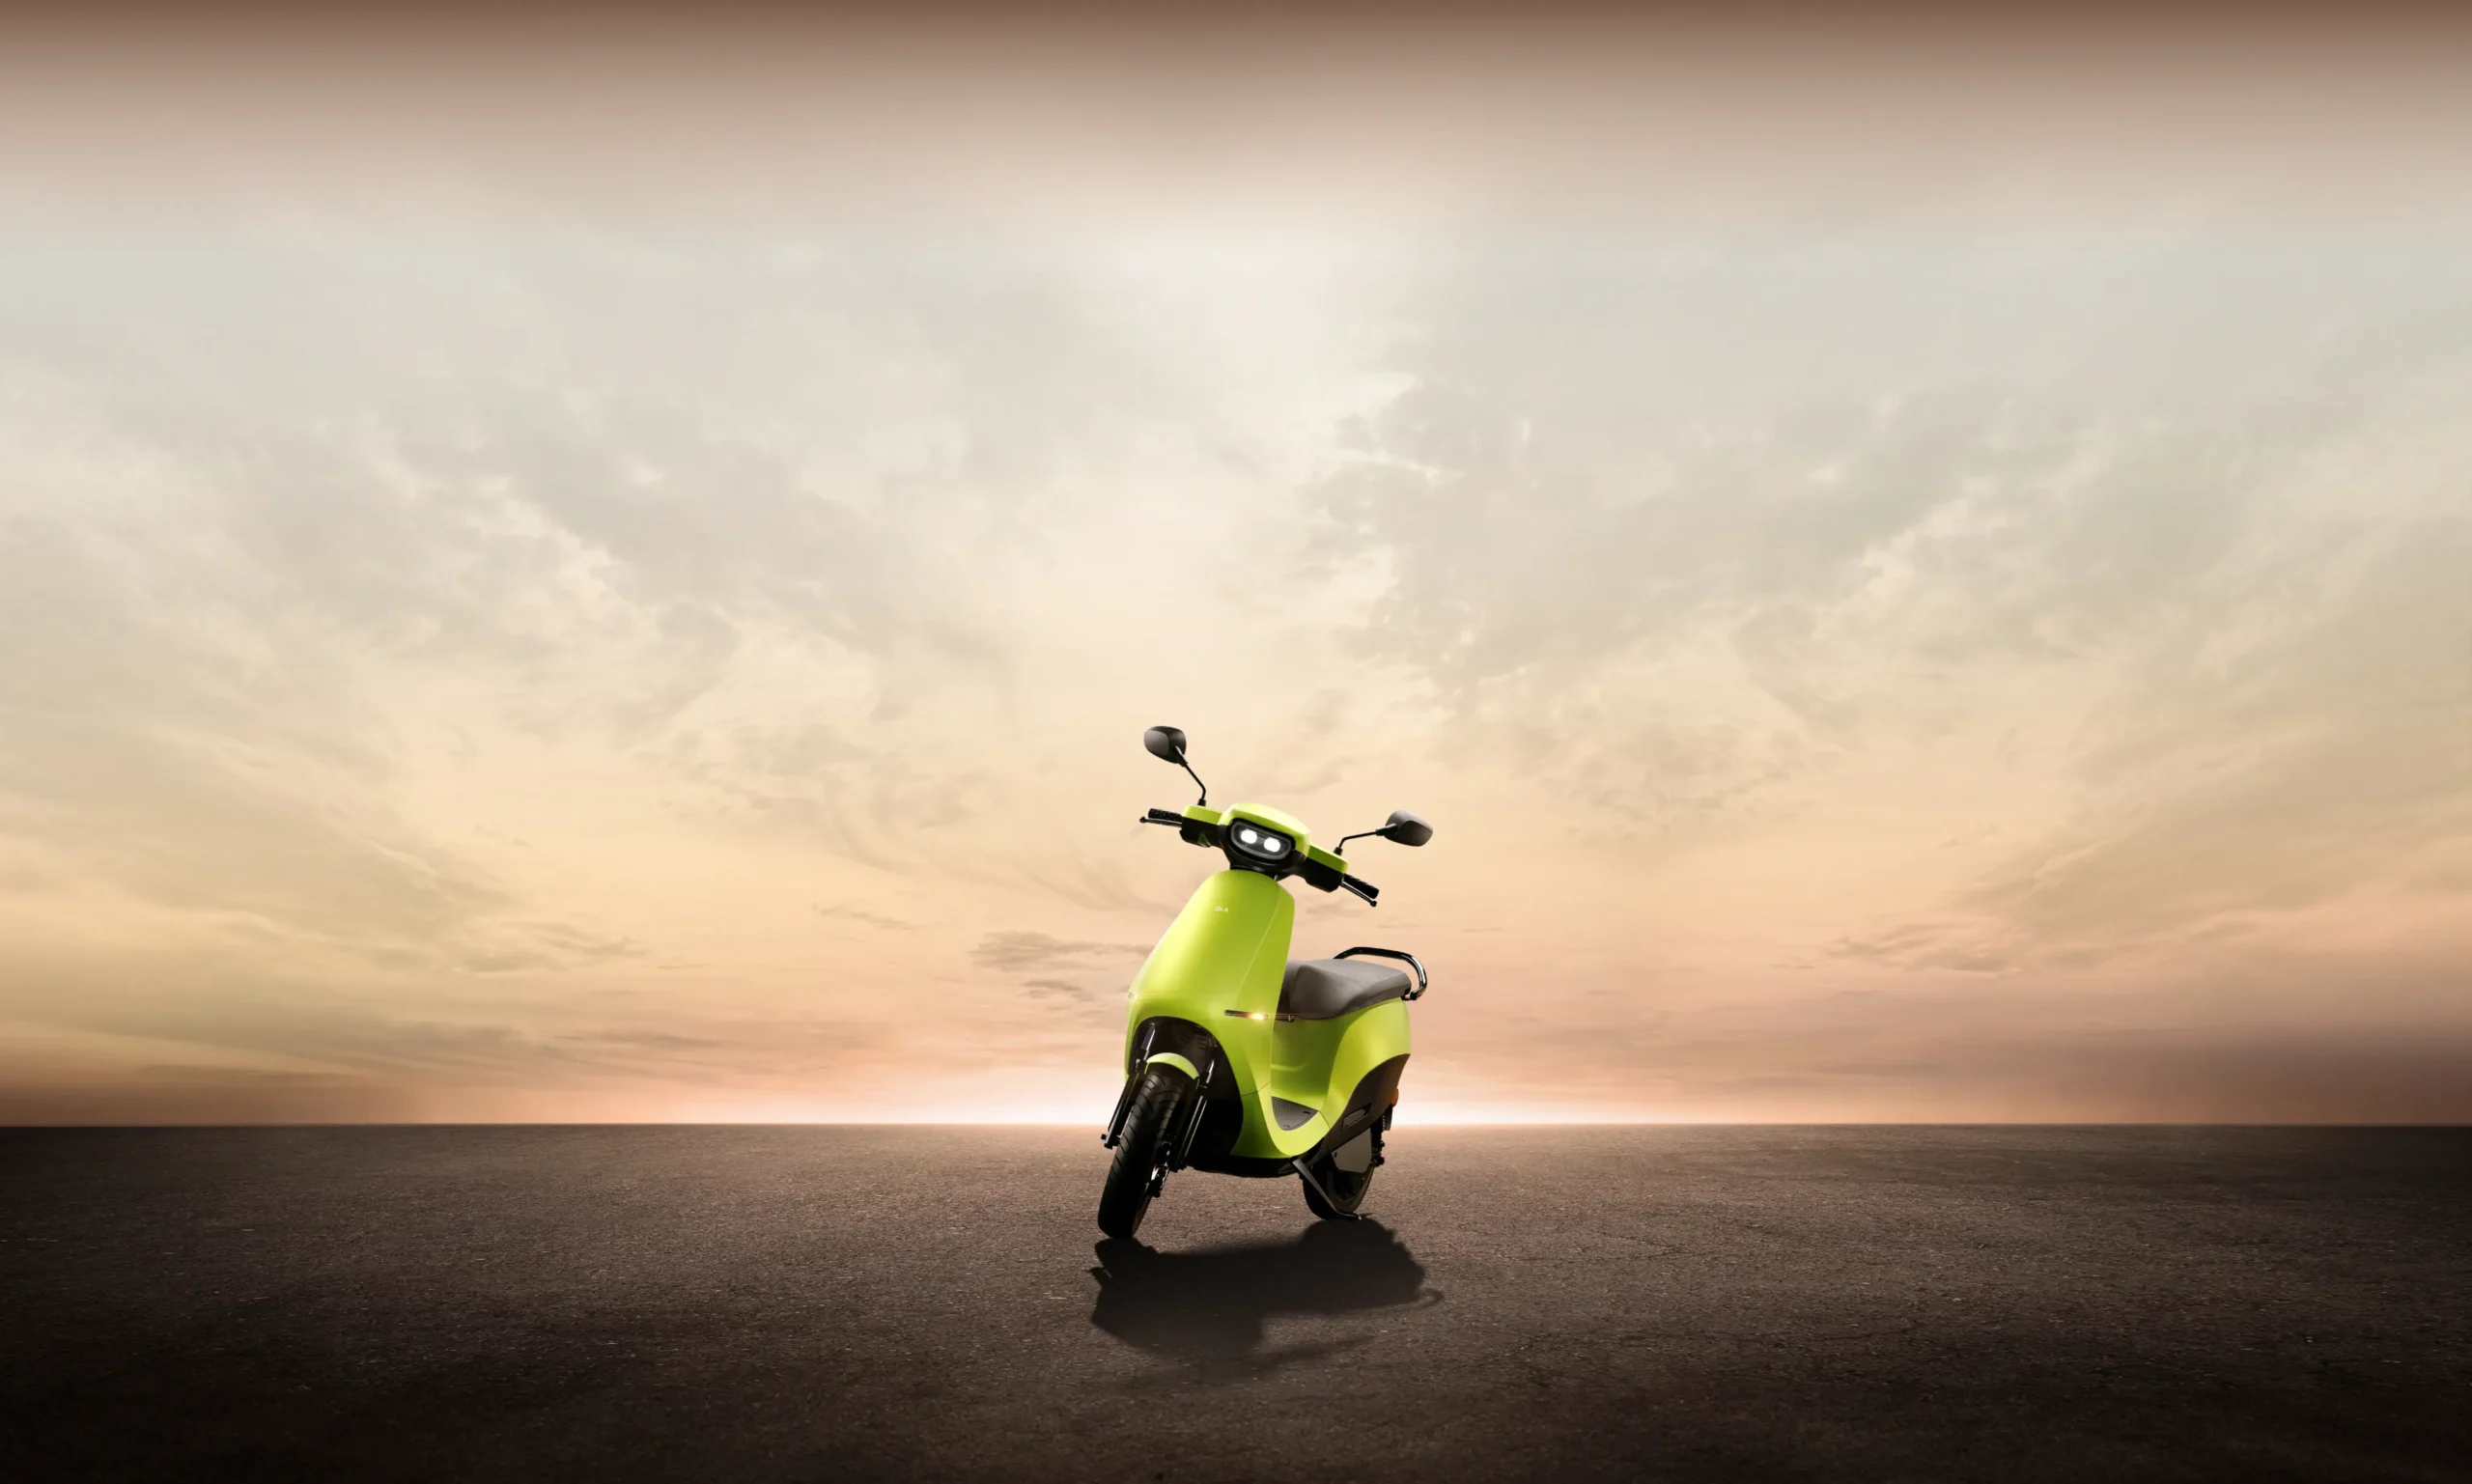 A lime green Ola Electric scooter upright against a backdrop of the sky and setting sun as part of an article about autonomous scooters.